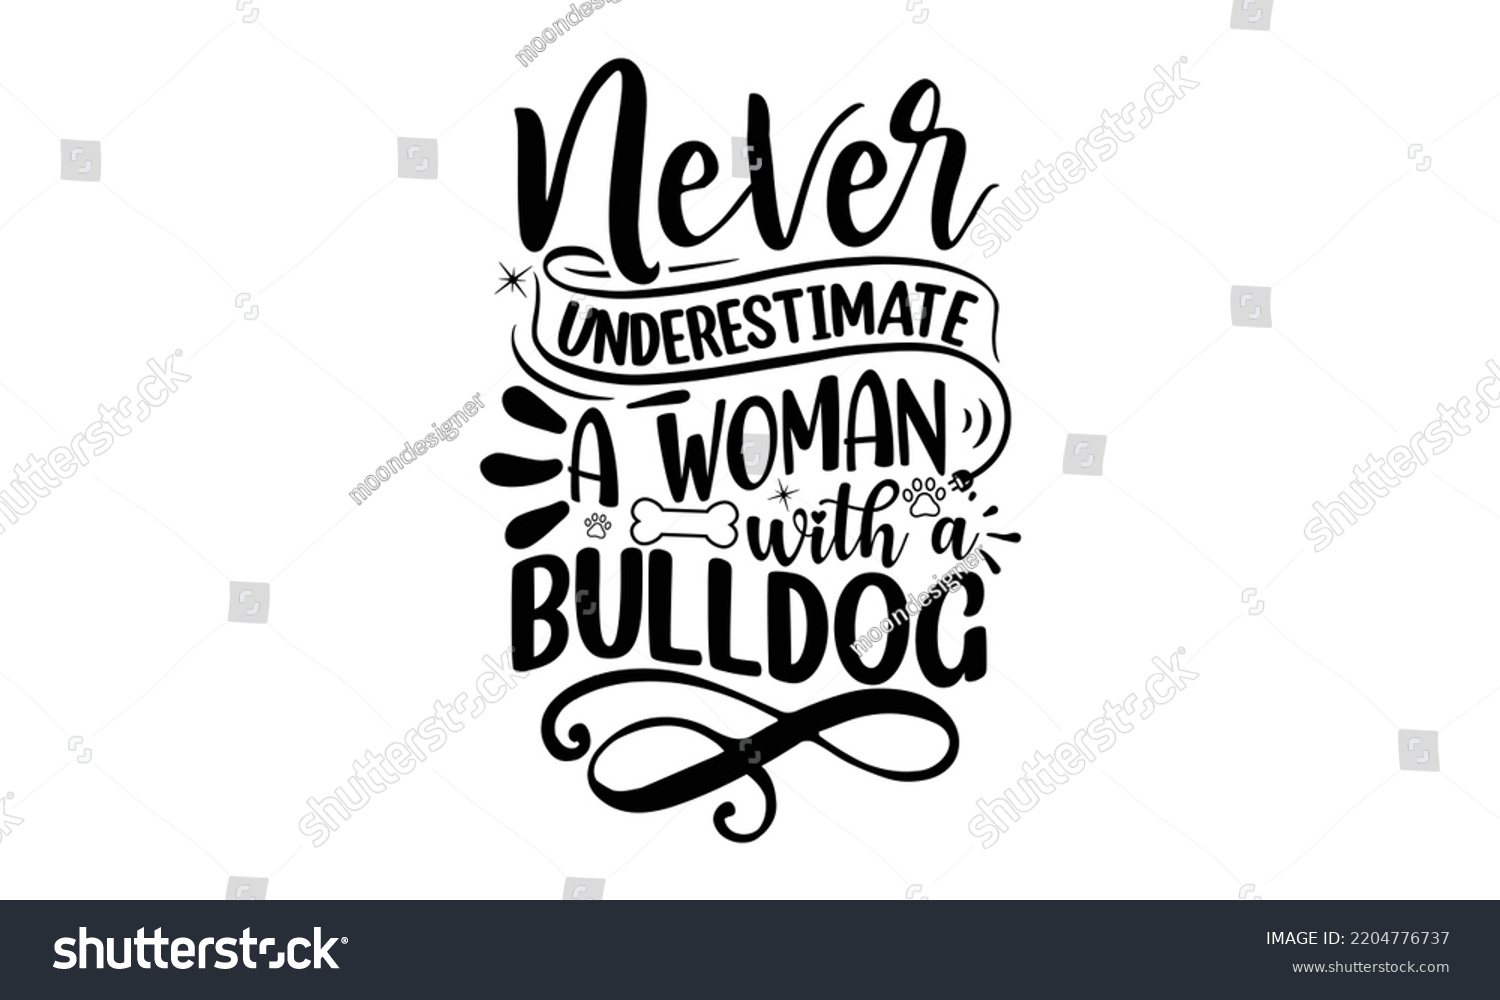 SVG of Never underestimate a woman with a bulldog- Bullodog T-shirt and SVG Design,  Dog lover t shirt design gift for women, typography design, can you download this Design, svg Files for Cutting and Silhou svg